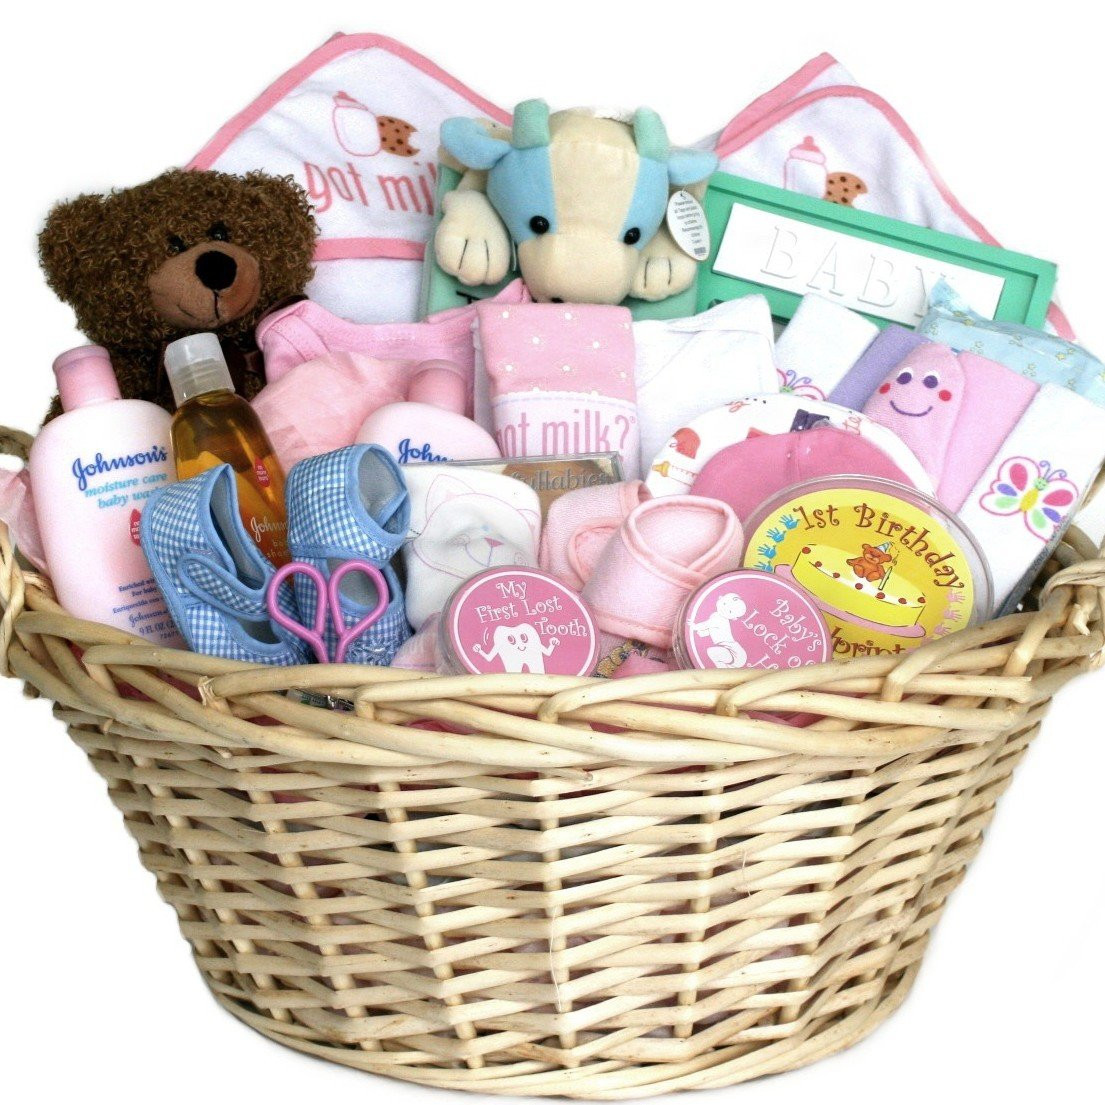 New Baby Gift Ideas
 New Baby Gift Basket Ideas Gift Ftempo